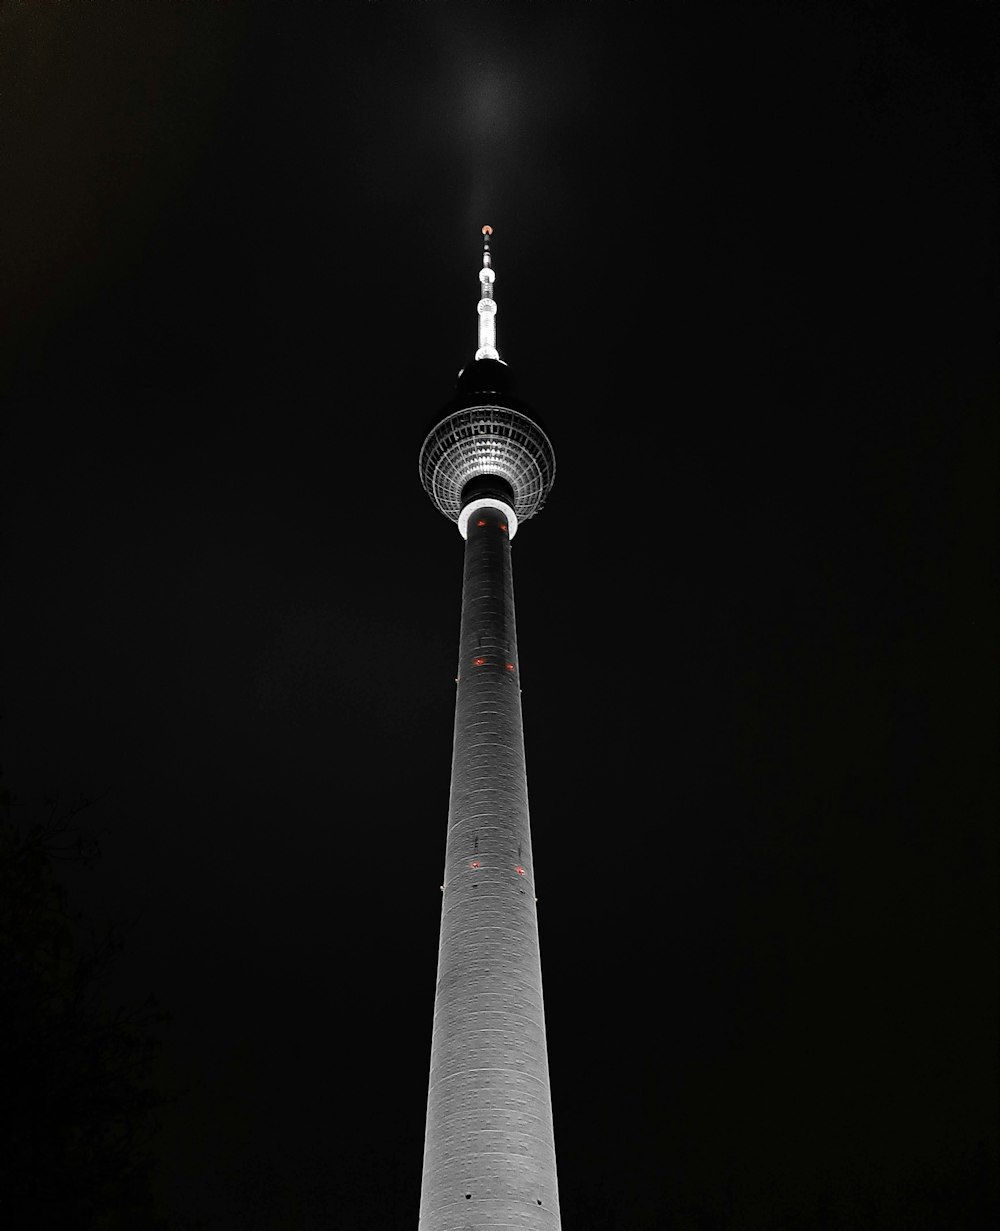 a very tall tower lit up at night